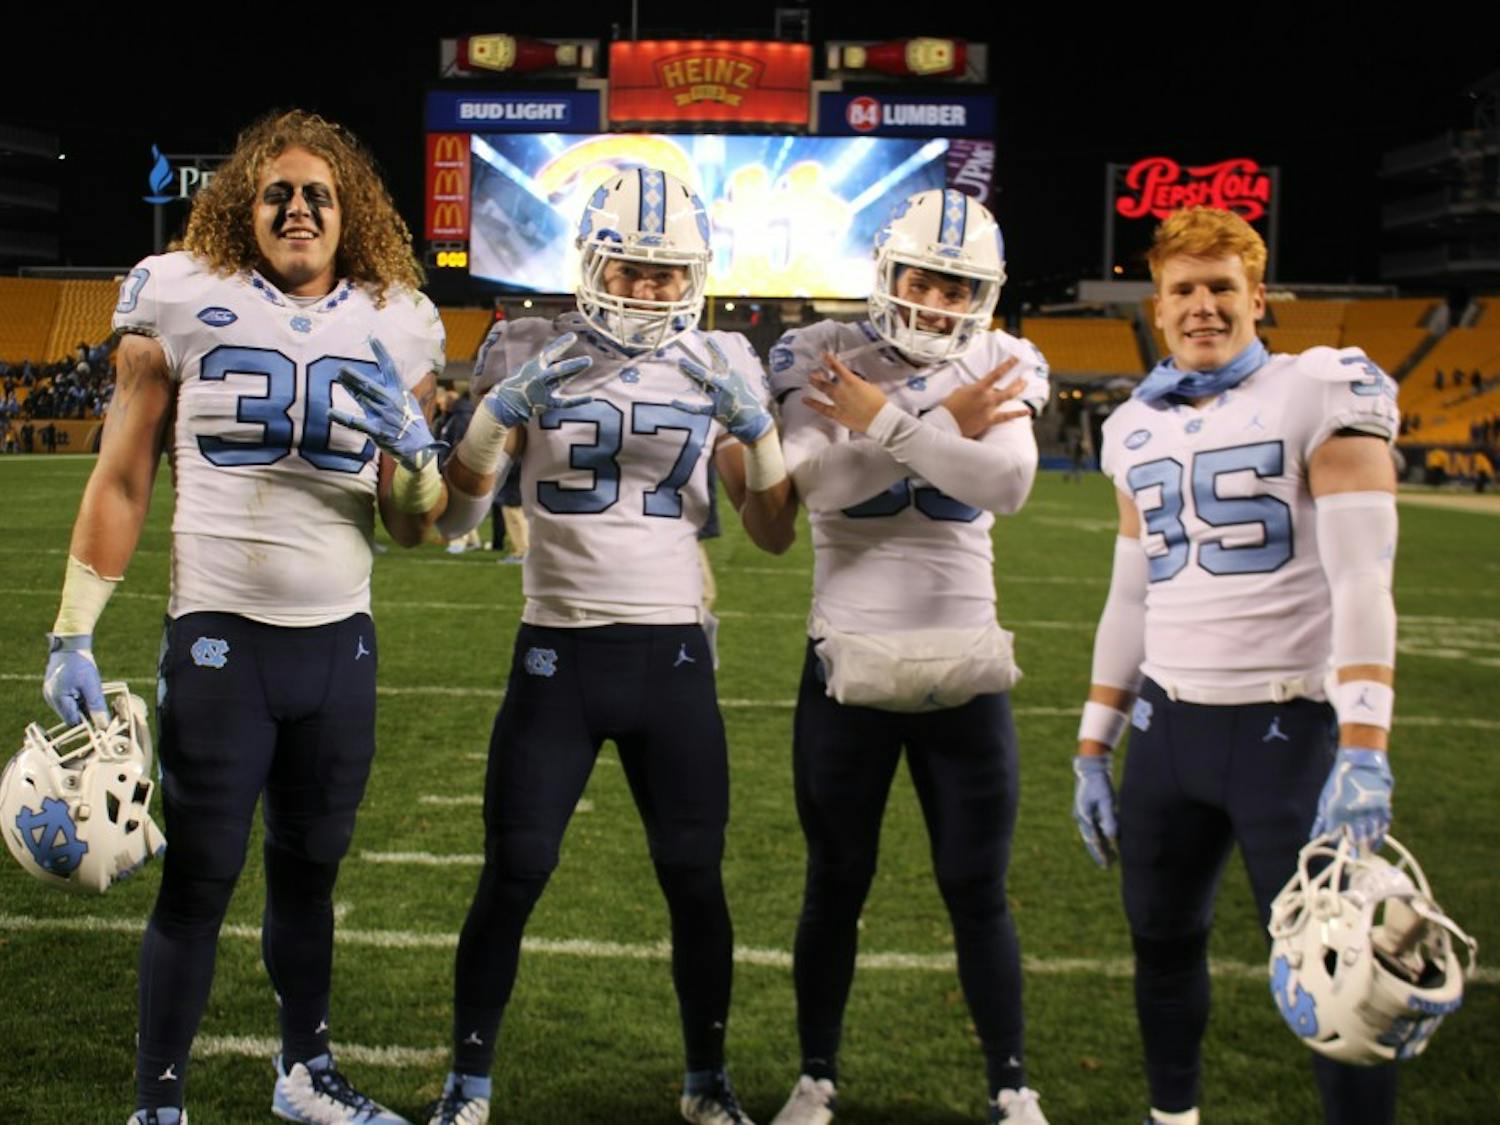 Hunter Crafford (30), Zach Goins (37), Tolson Jeffrey (95), and Chris Ripberger (35) are walk-ons to the UNC football team. Photo courtesy of Zach Goins.